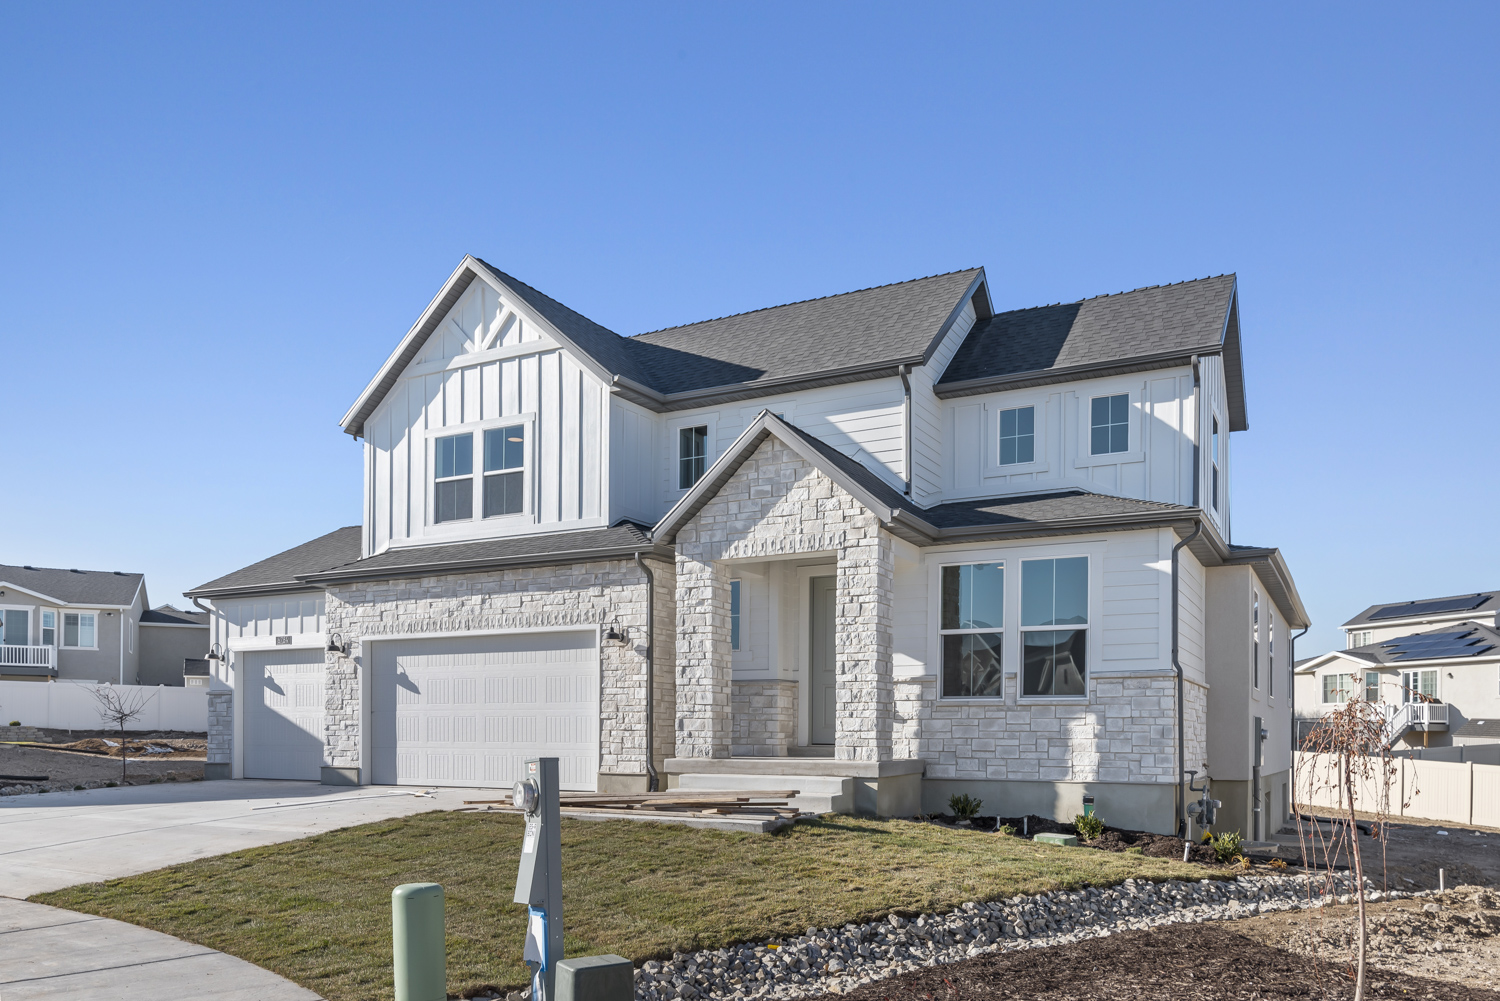 Home of the Day in WEST JORDAN